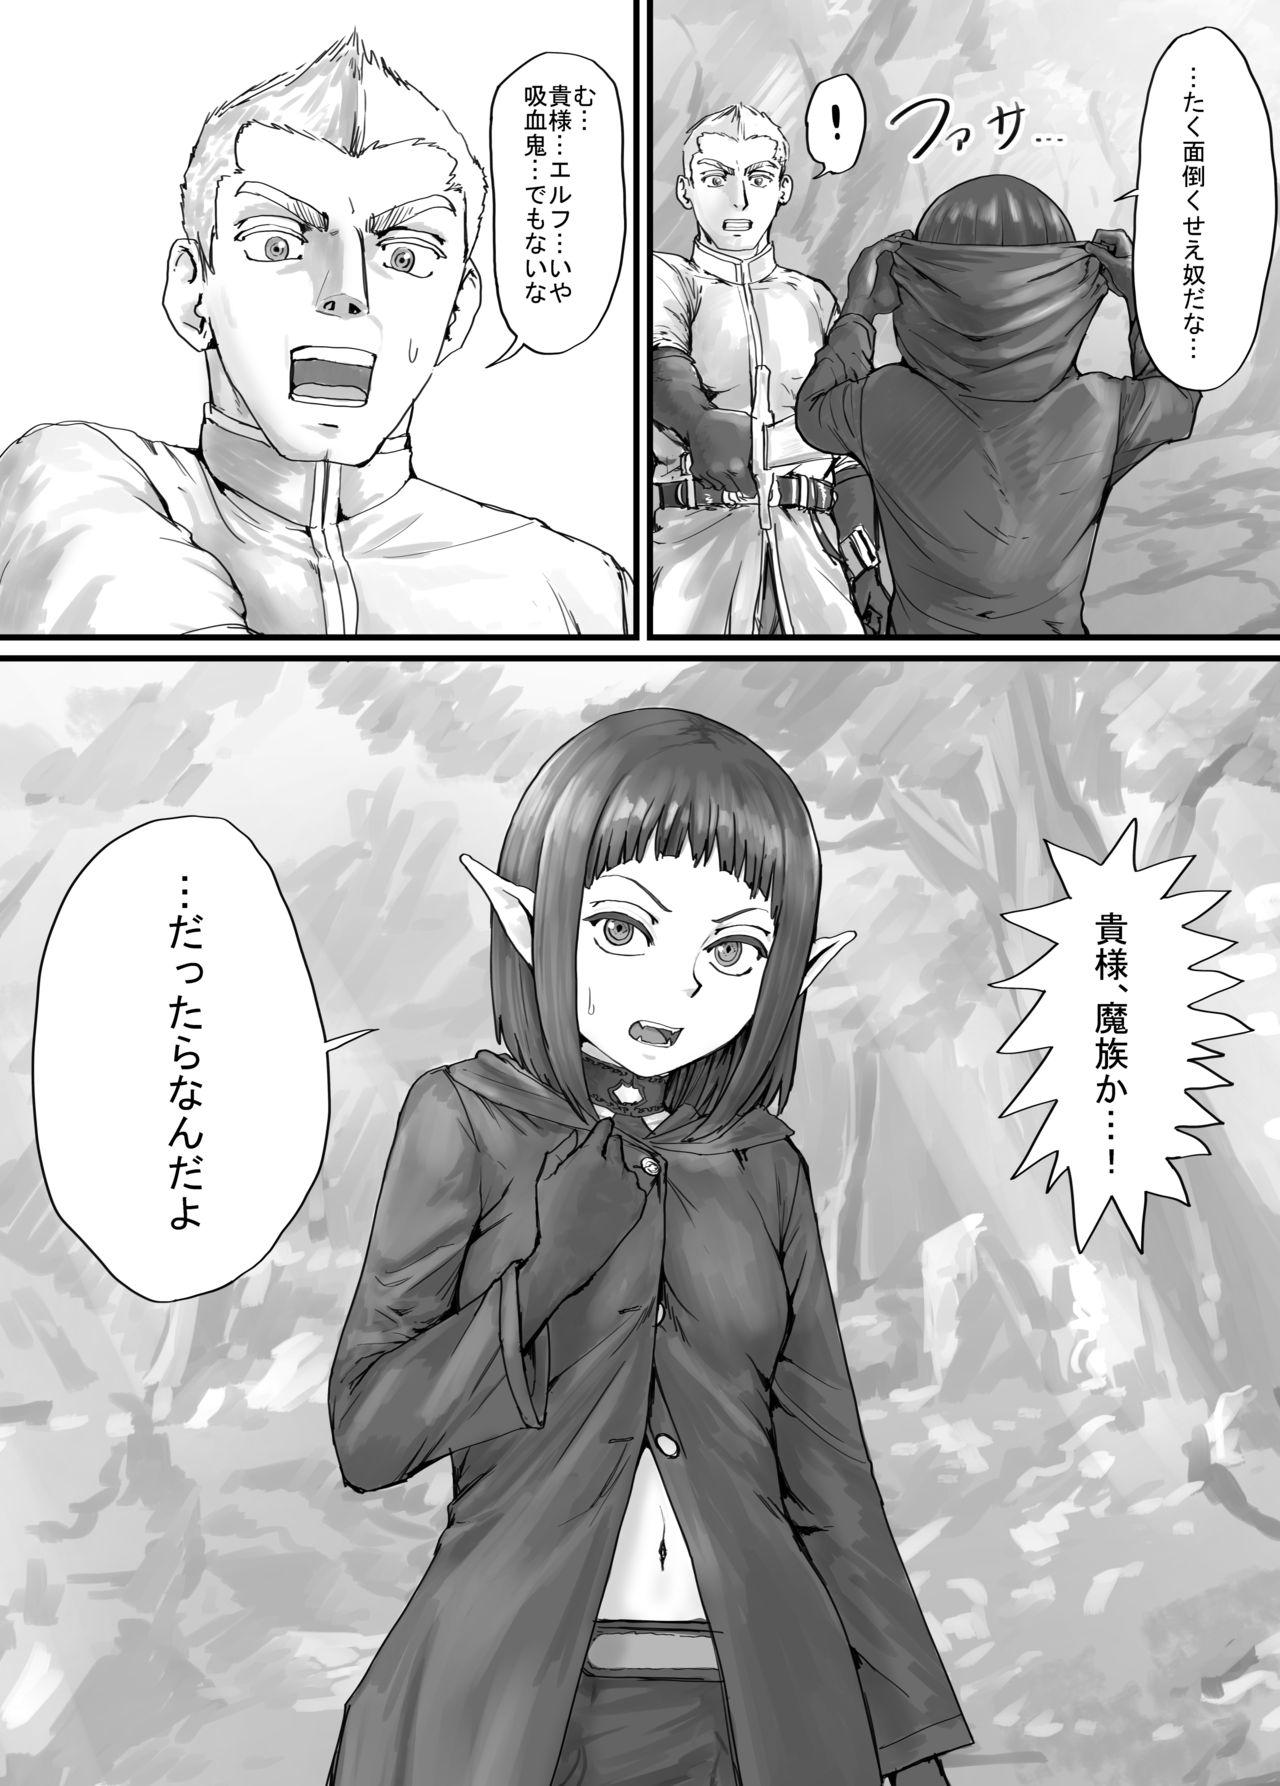 Gay Trimmed 魔族ちゃん漫画1 - Original Deutsch - Page 4